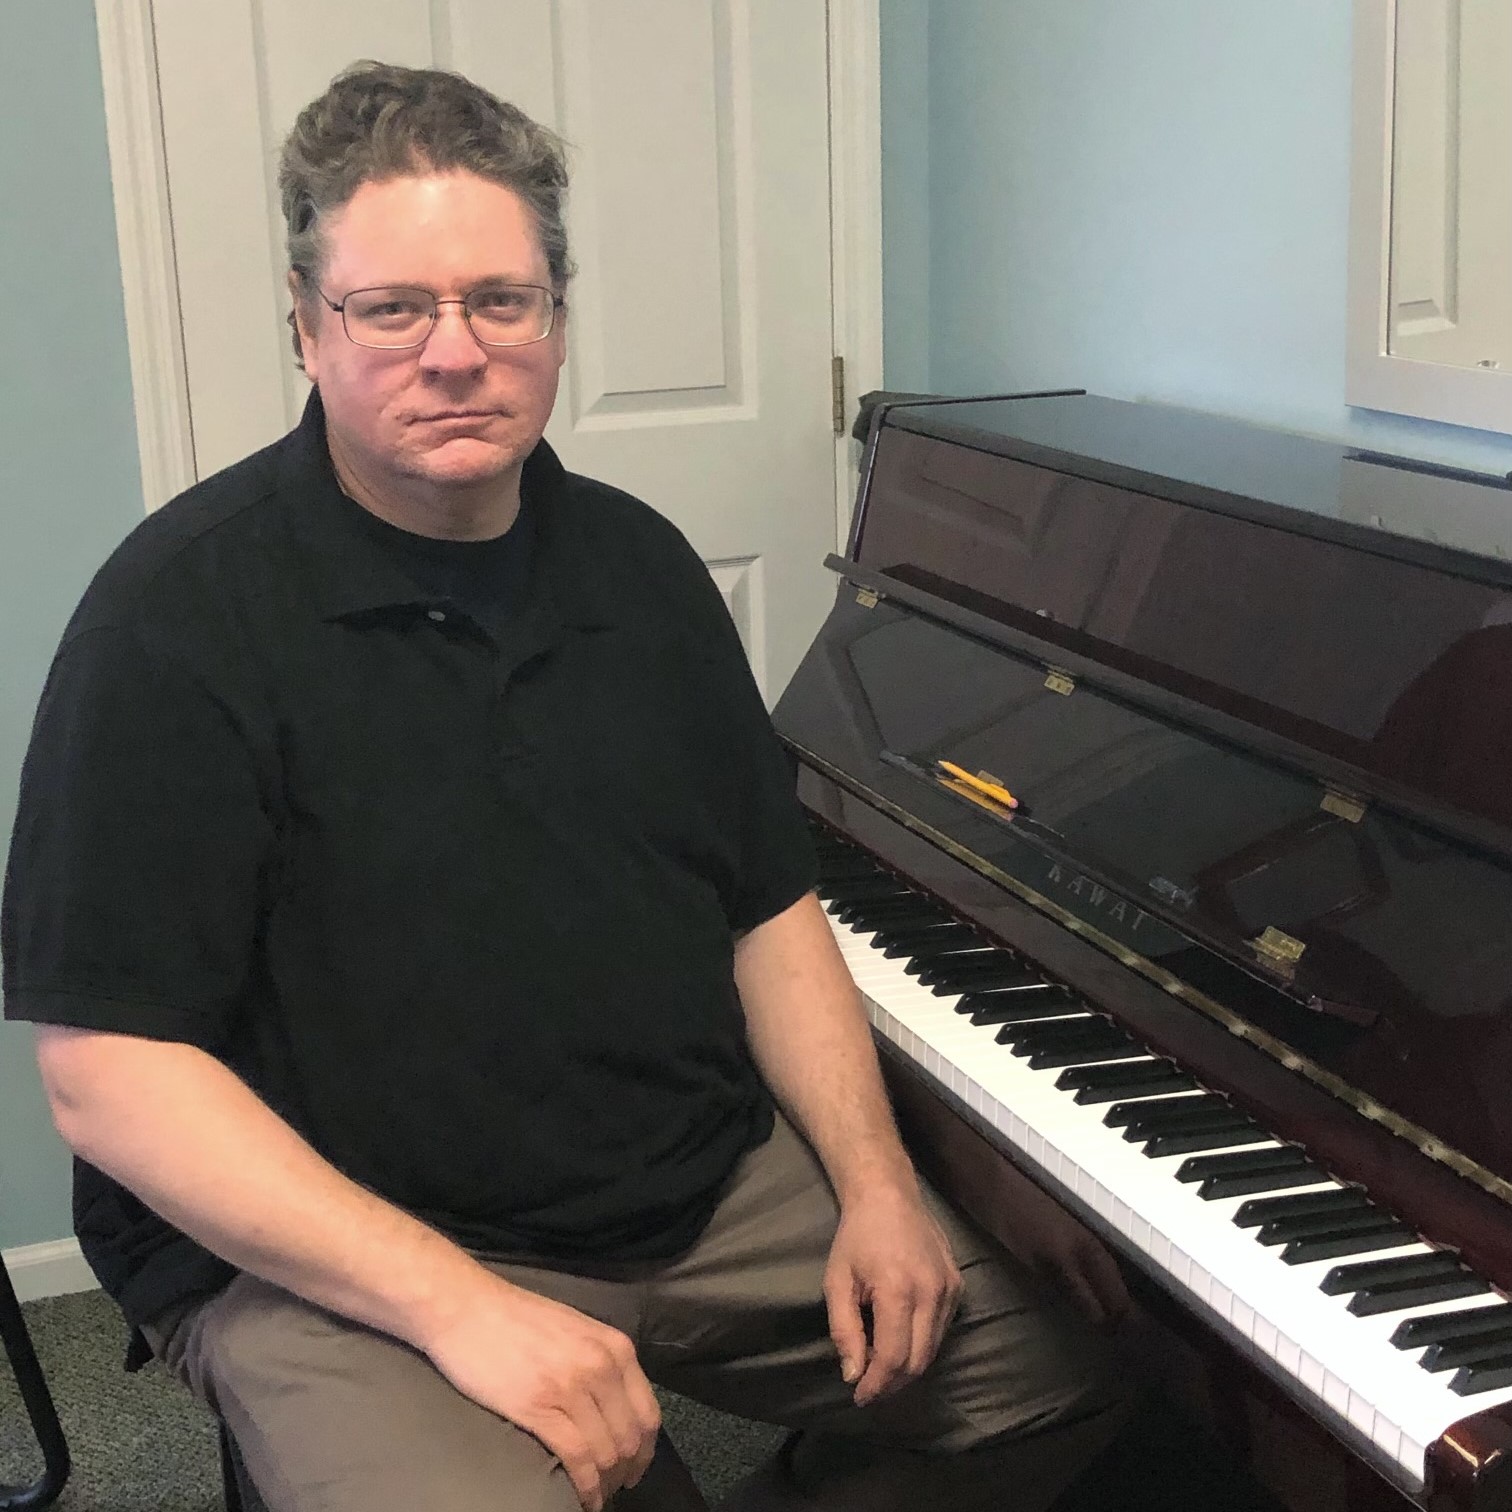 Piano Lessons at the New Jersey School of Music in Cherry Hill NJ with Bob Thomas